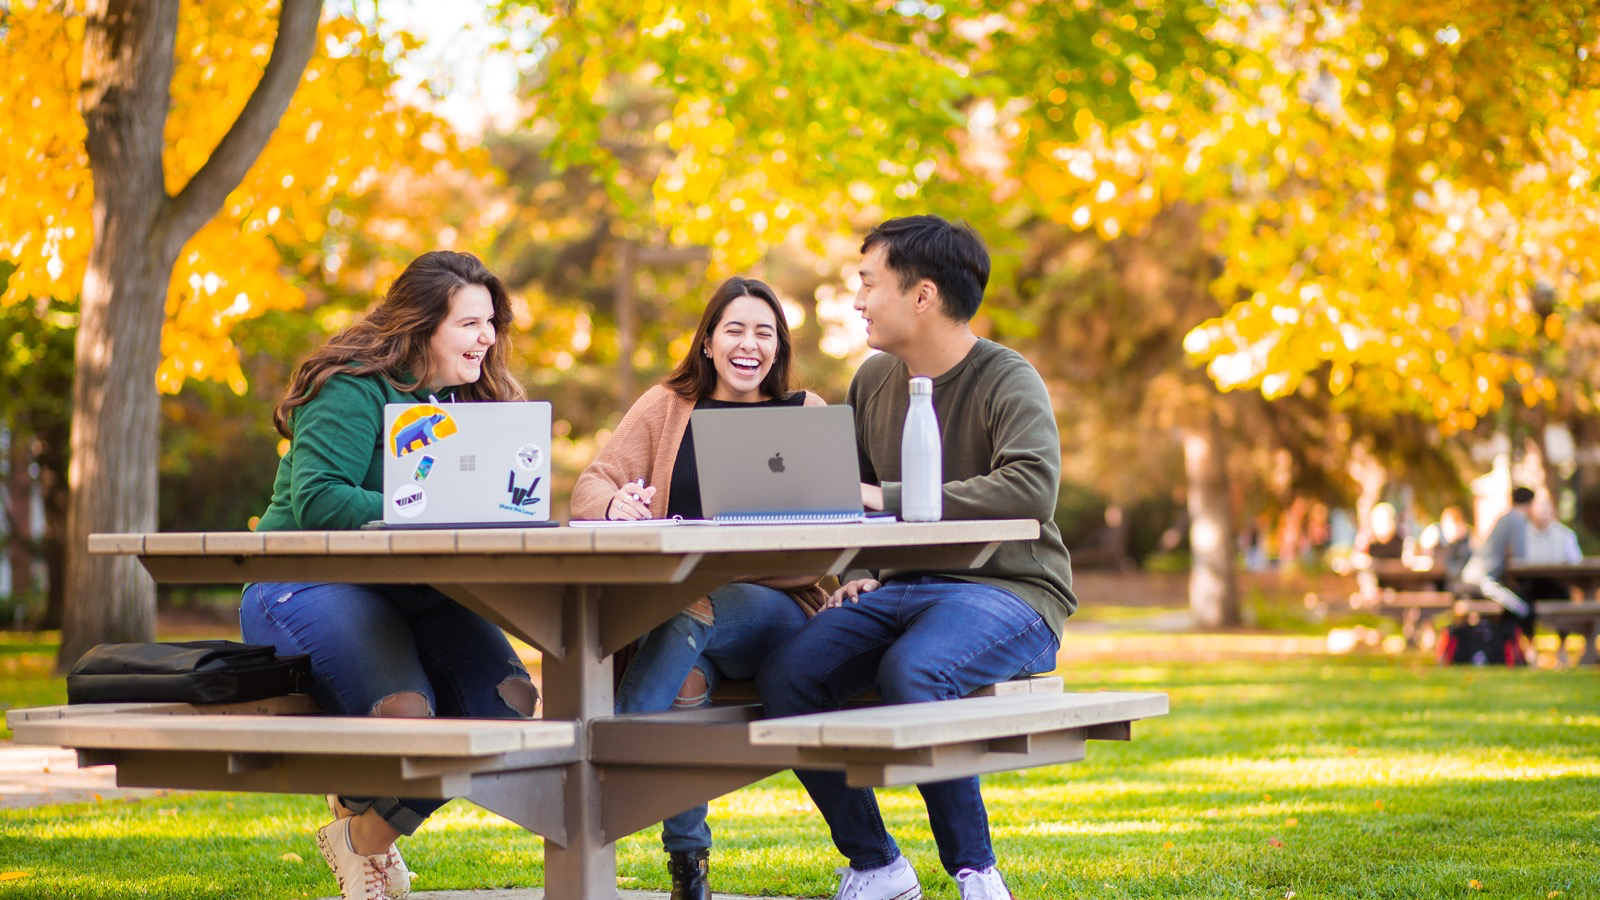 Three students sitting at a picnic table outside. The trees in the background have fall leaves coloured Green and Gold.